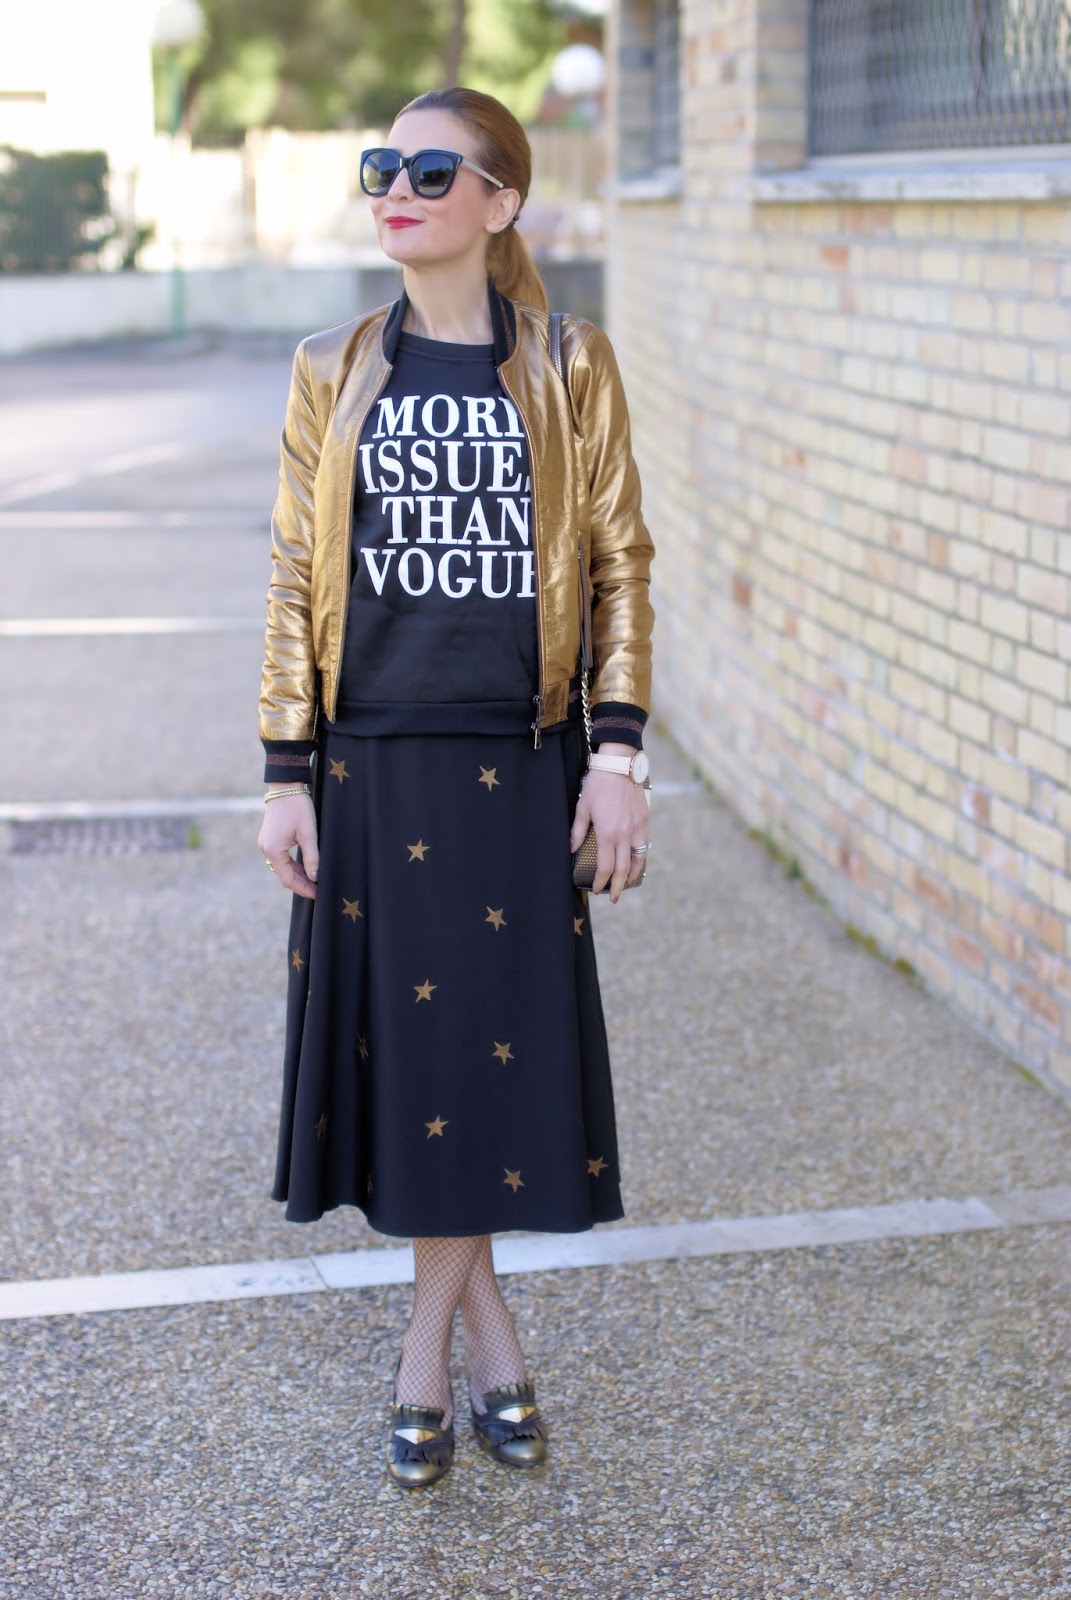 More issues than Vogue fashion outfit on Fashion and Cookies fashion blog, fashion blogger styl